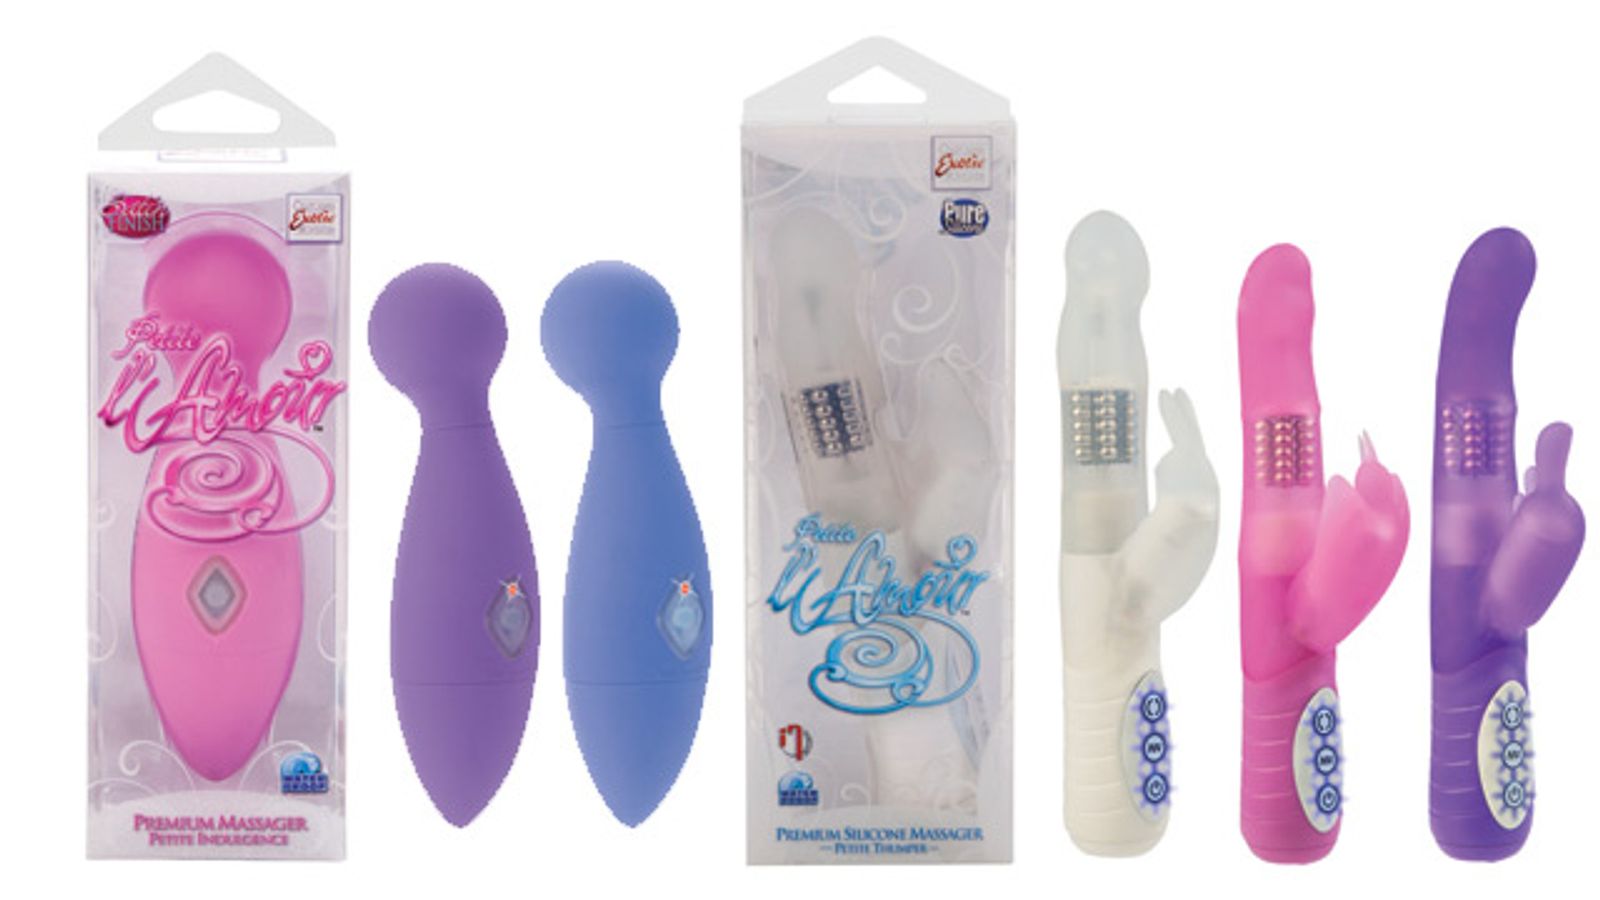 California Exotic Novelties Releases Additions to L'Amour